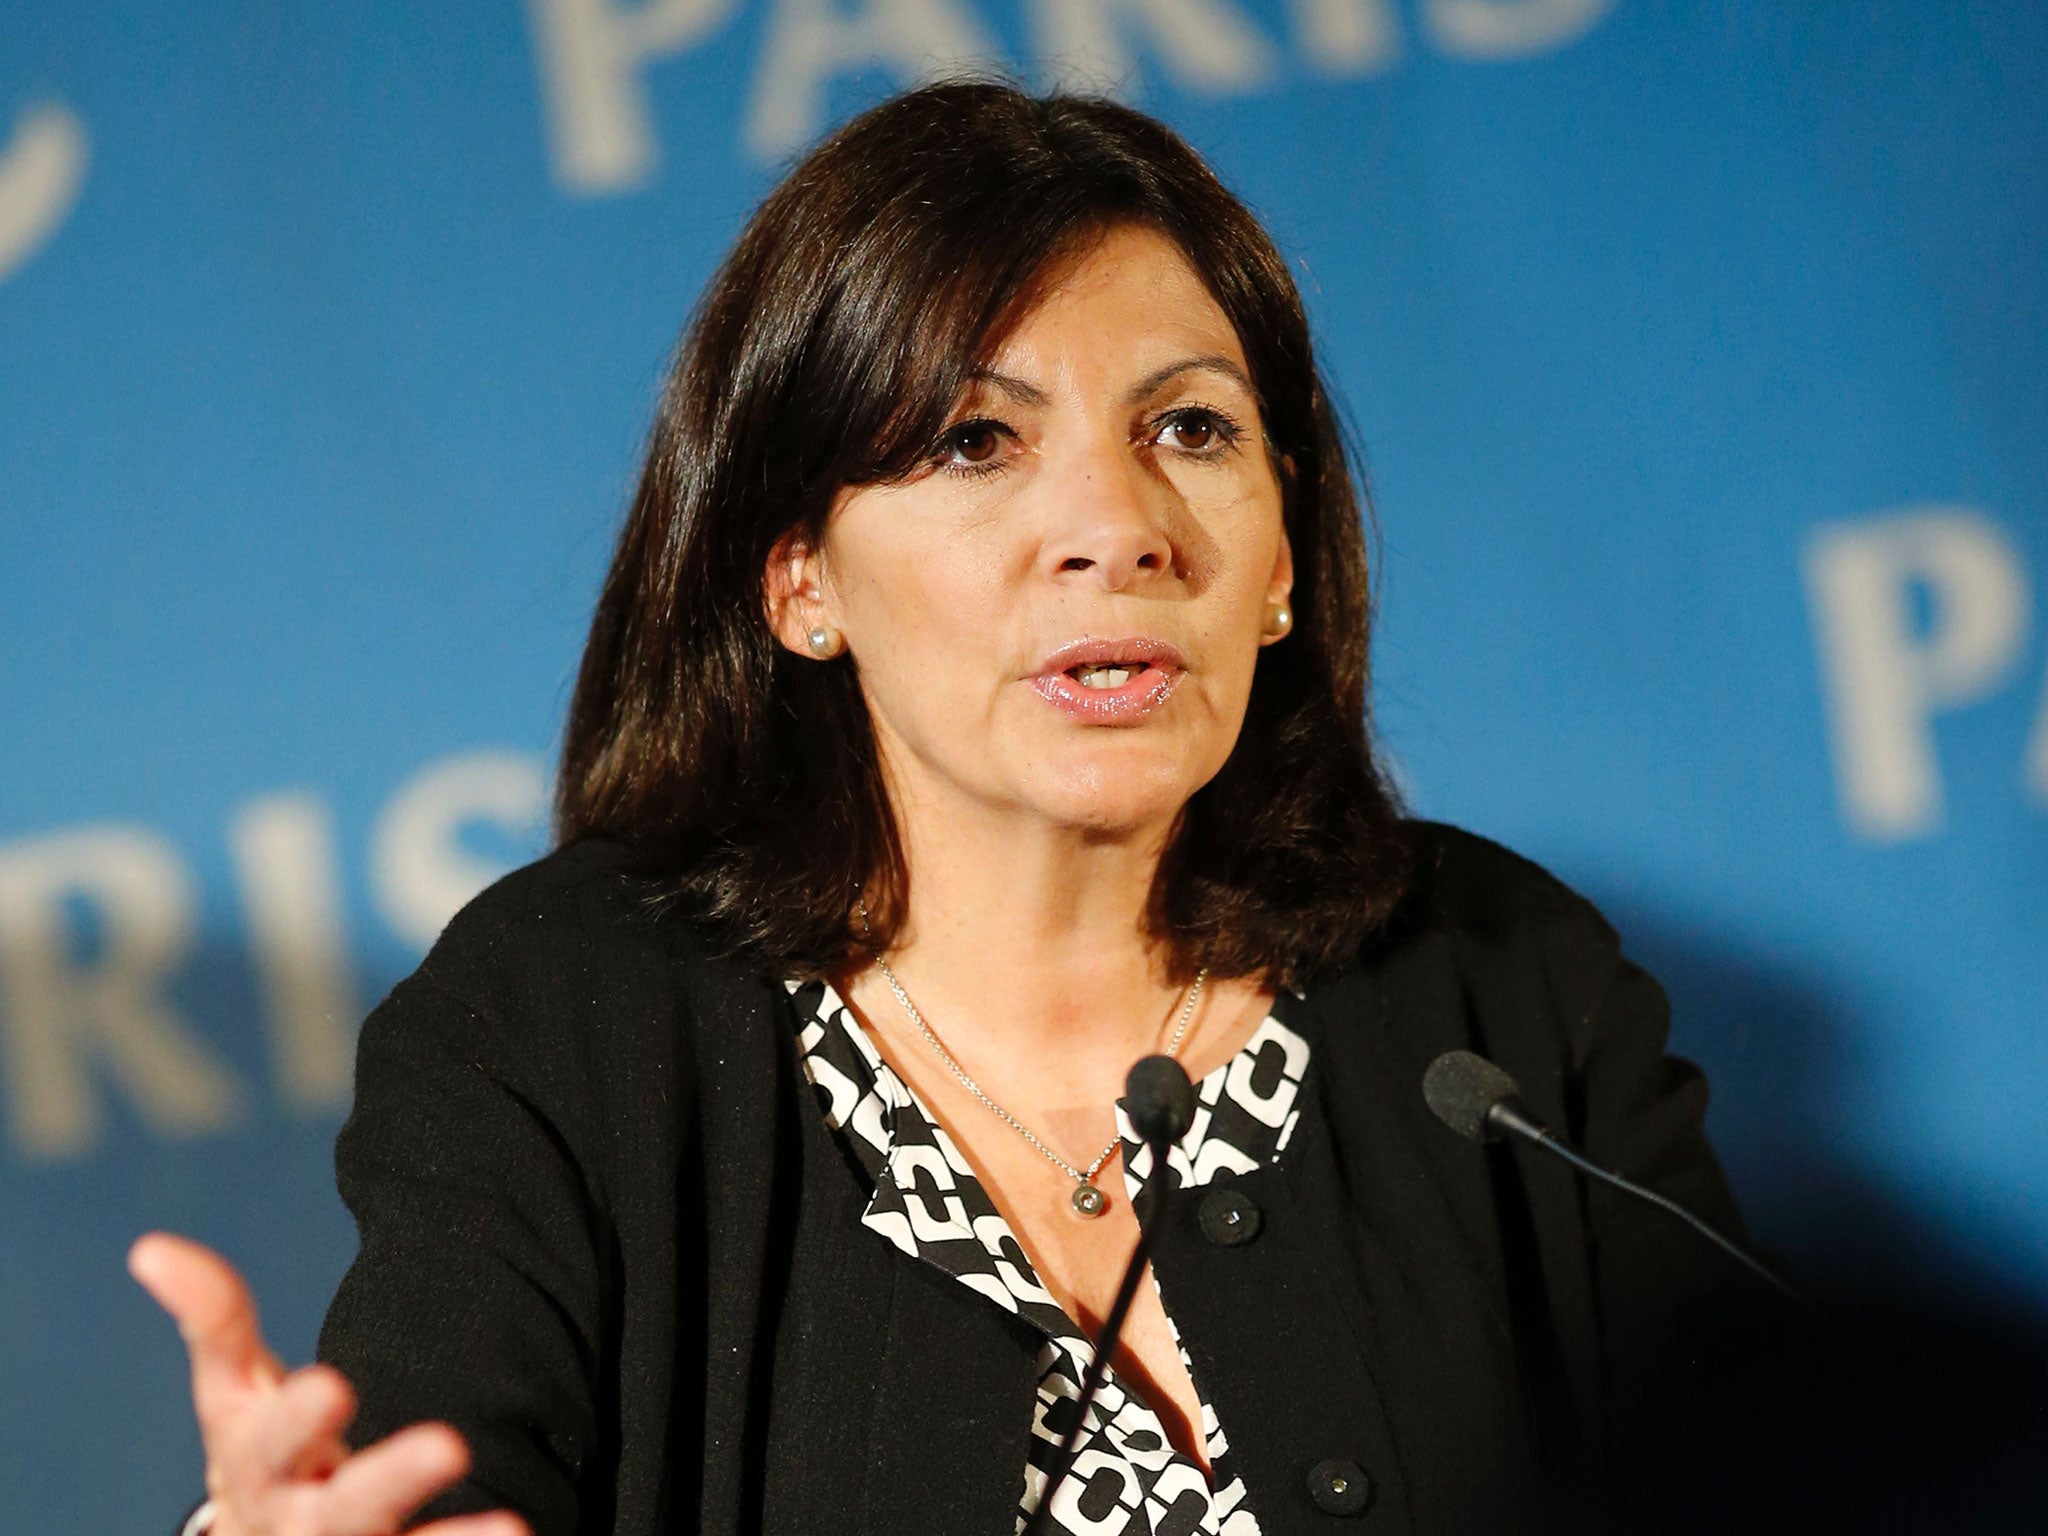 Mayor of Paris Anne Hidalgo says refugees would be able to stay for up to 10 days